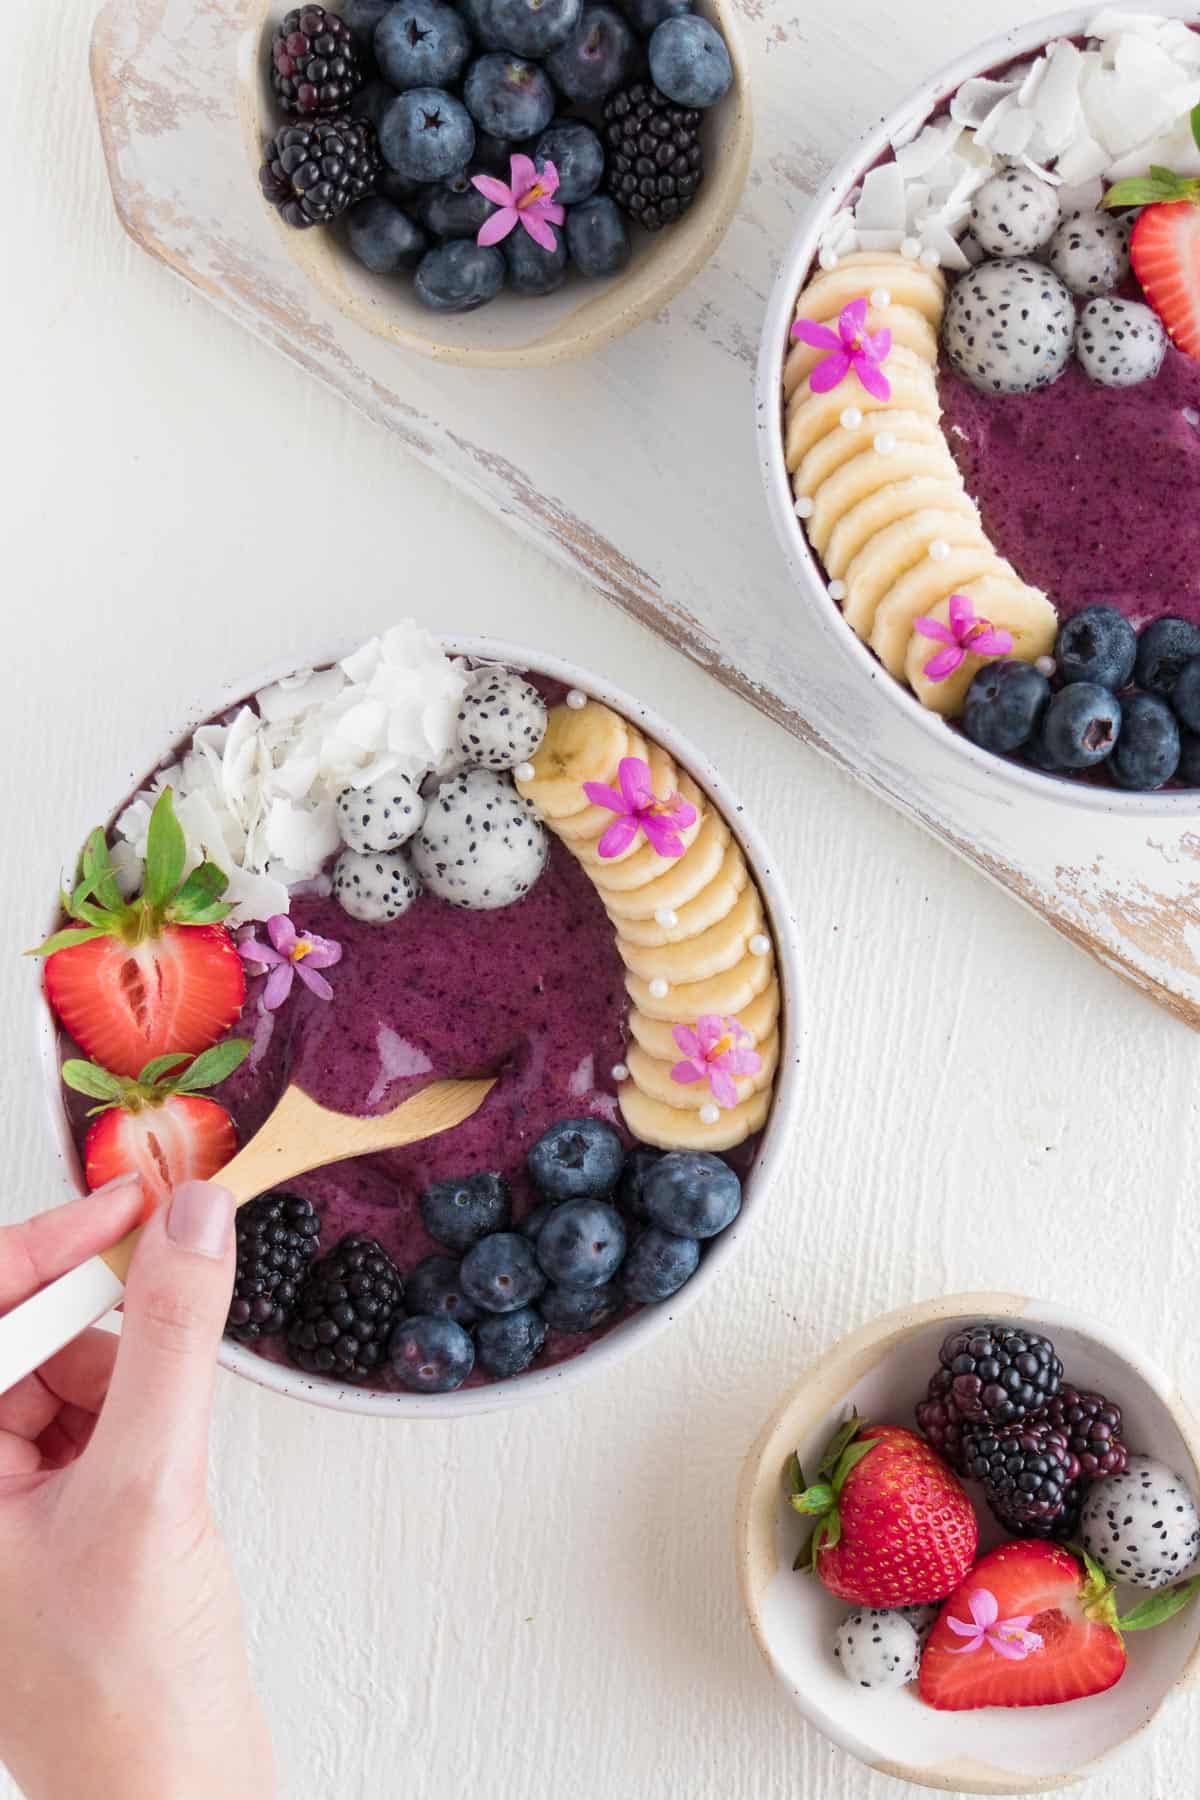 a spoon scooping into an acai bowl